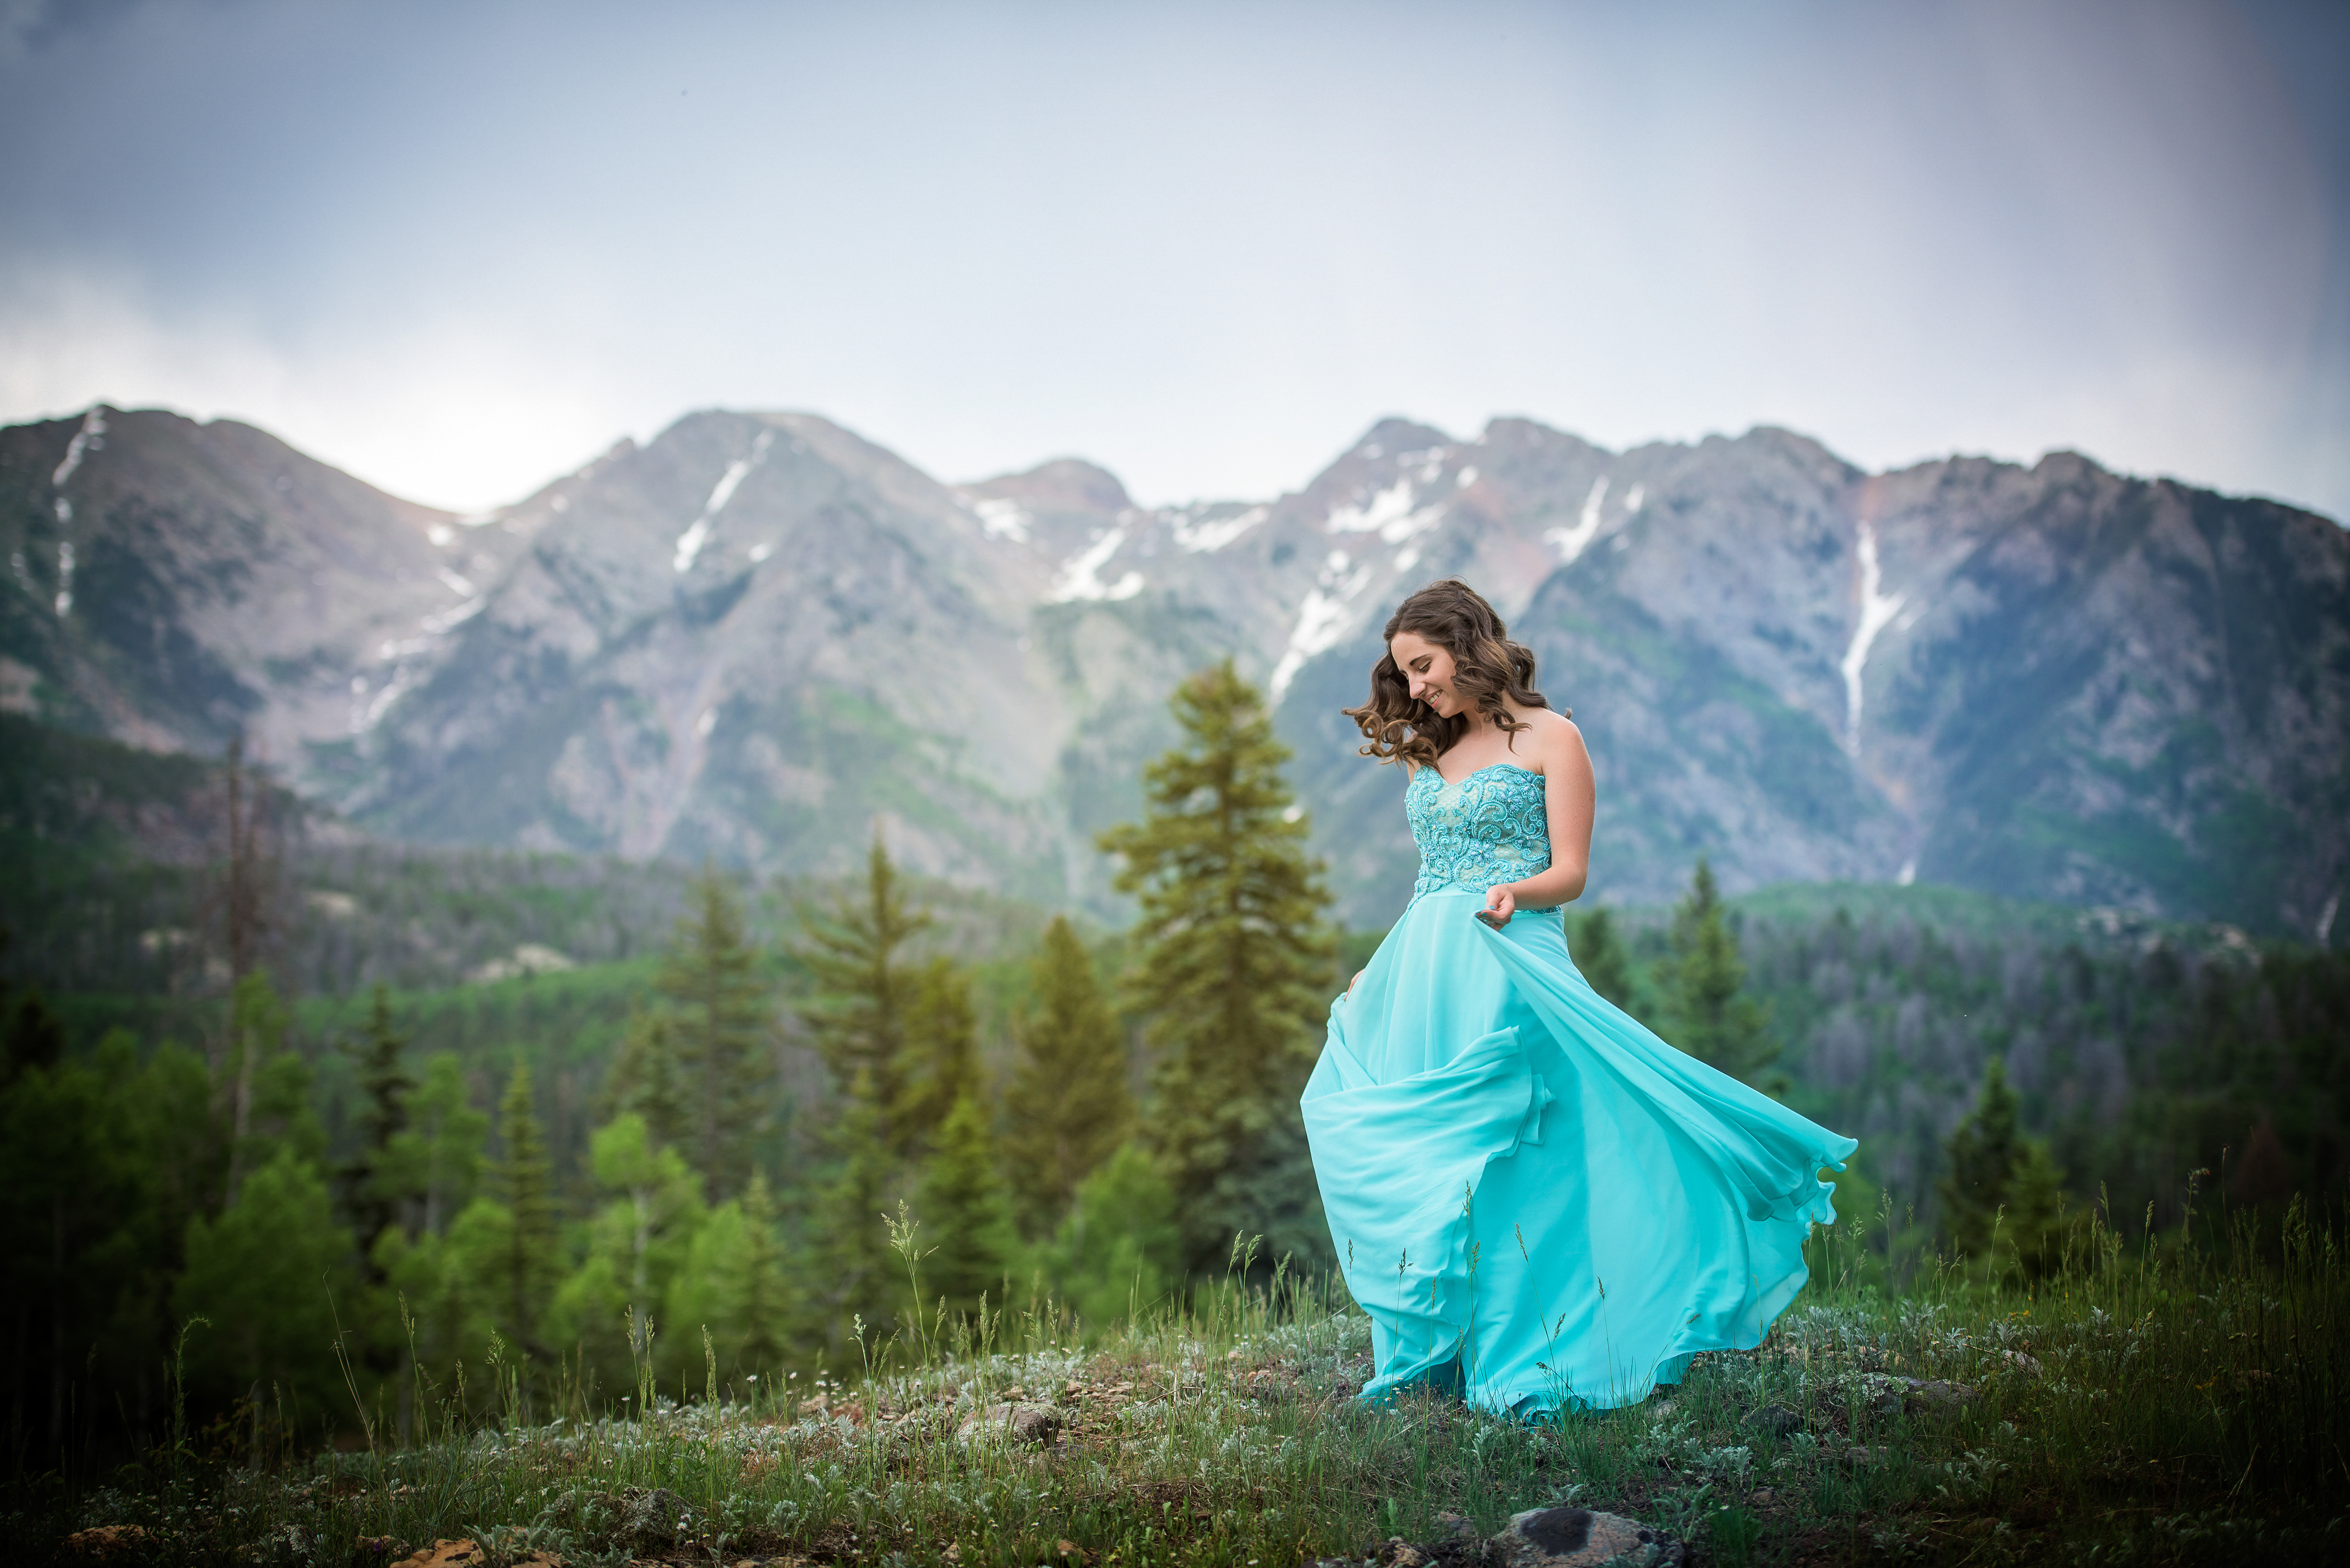 Senior Pictures - mountains in blue dress